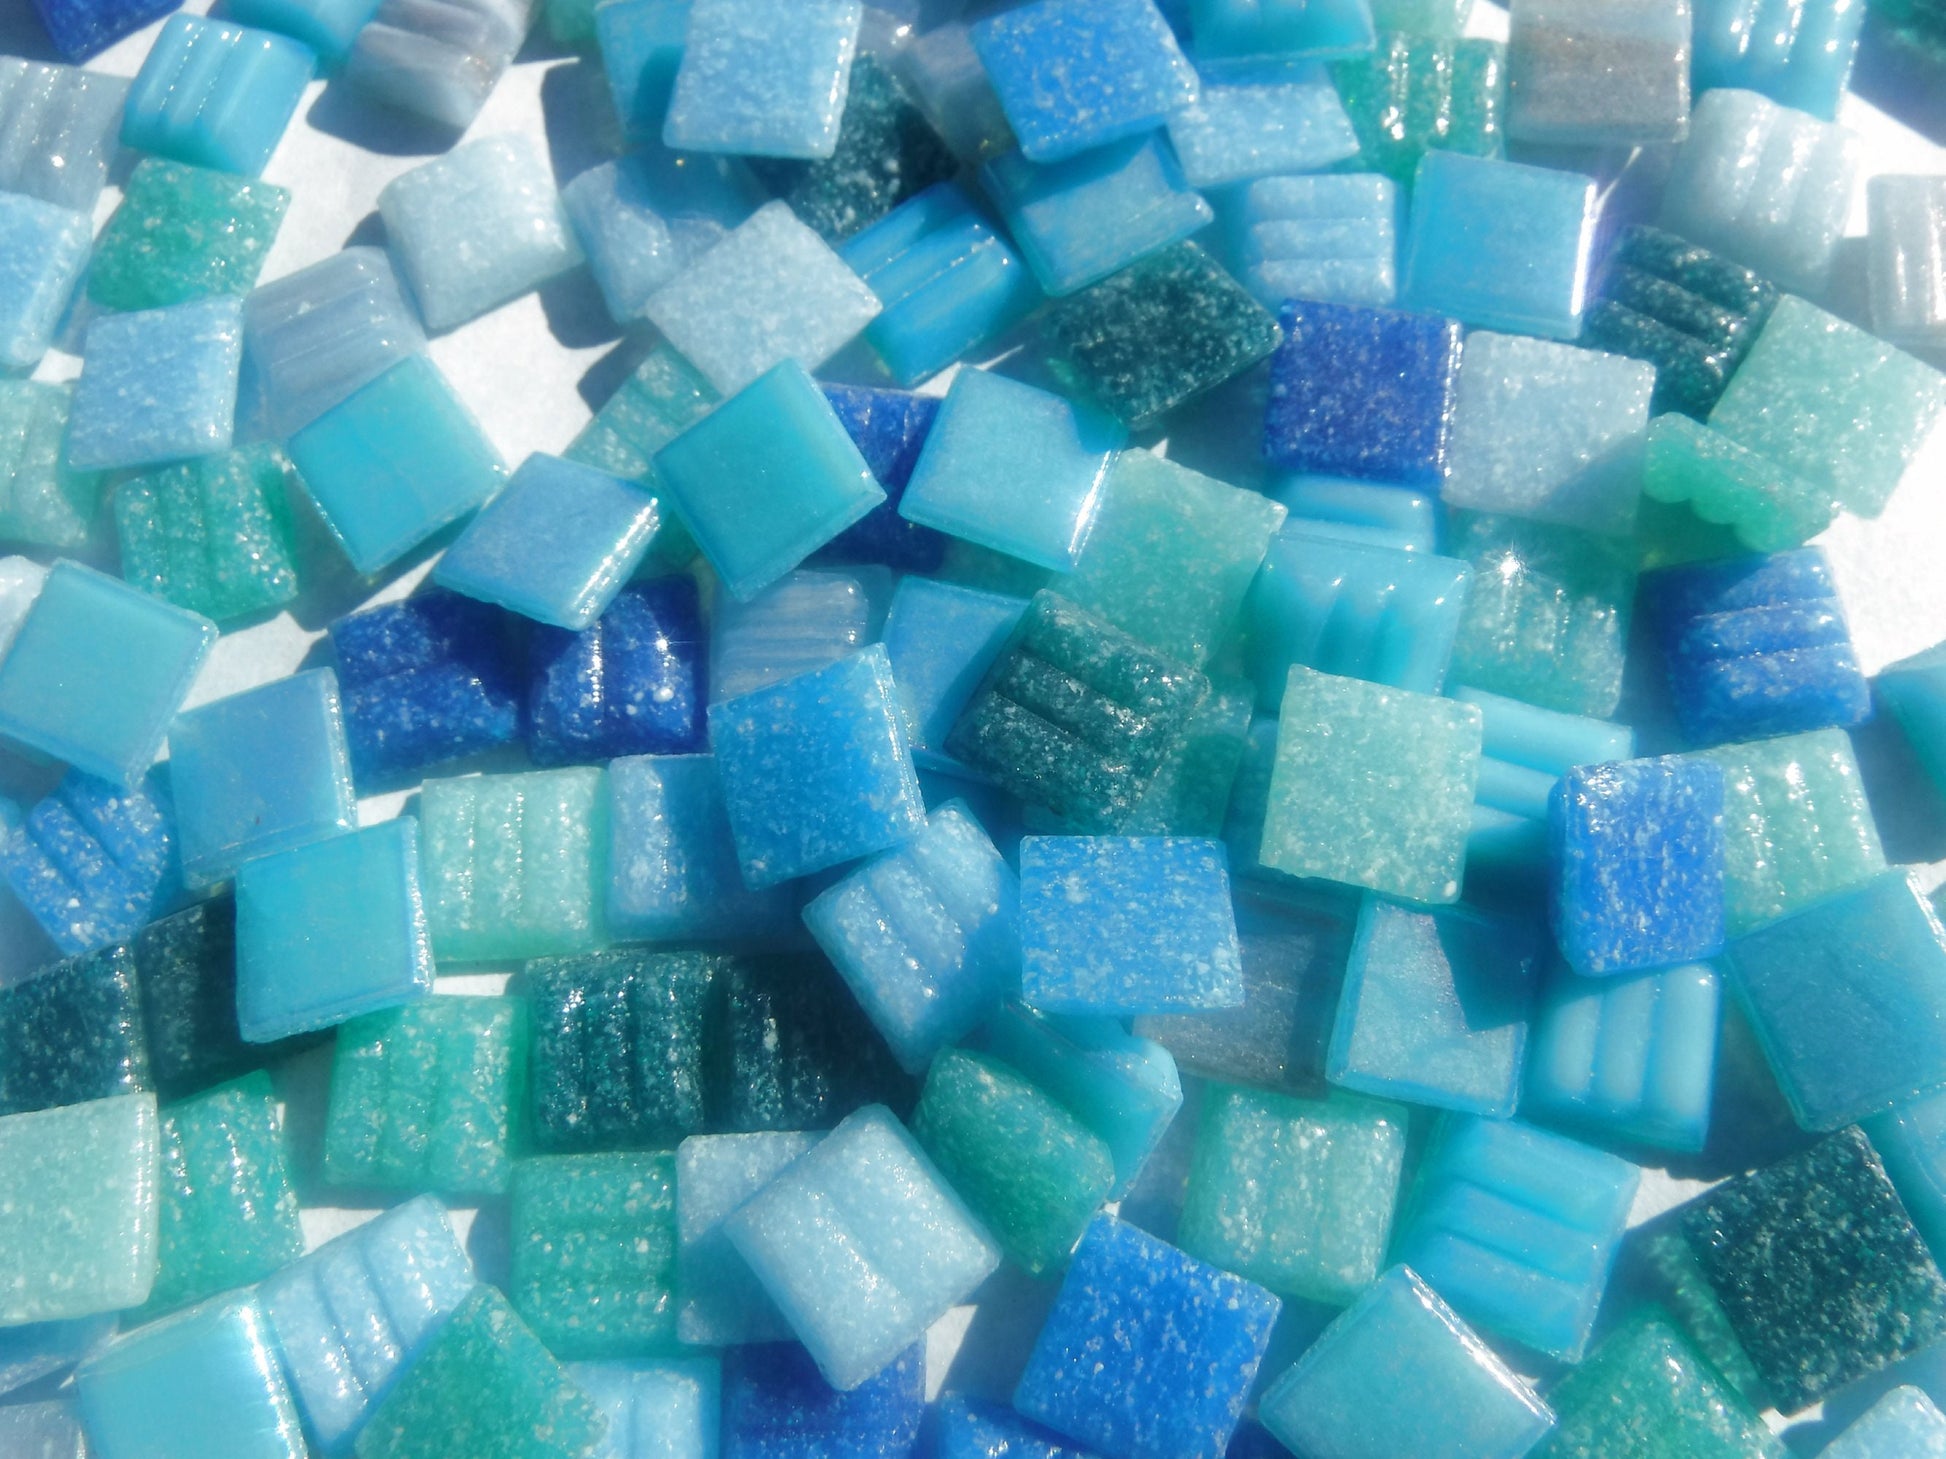 Blue and Green Mix Glass Mosaic Tiles Squares - 1 cm - 100g of Venetian and Vitreous Glass in Aqua Vita Assortment - Approx 140 Tiles